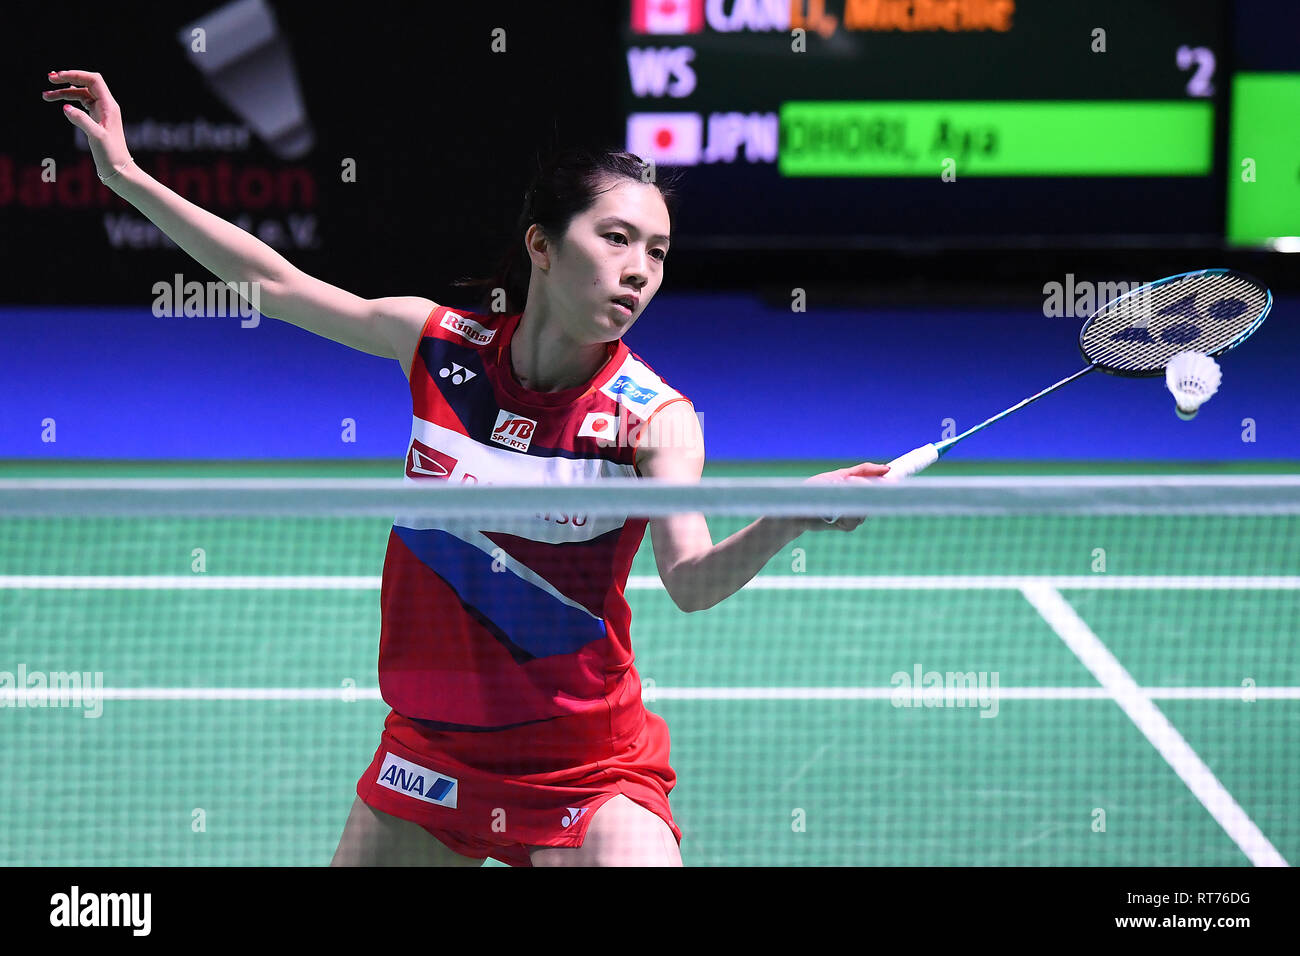 Yonex German Open High Resolution Stock Photography and Images - Alamy